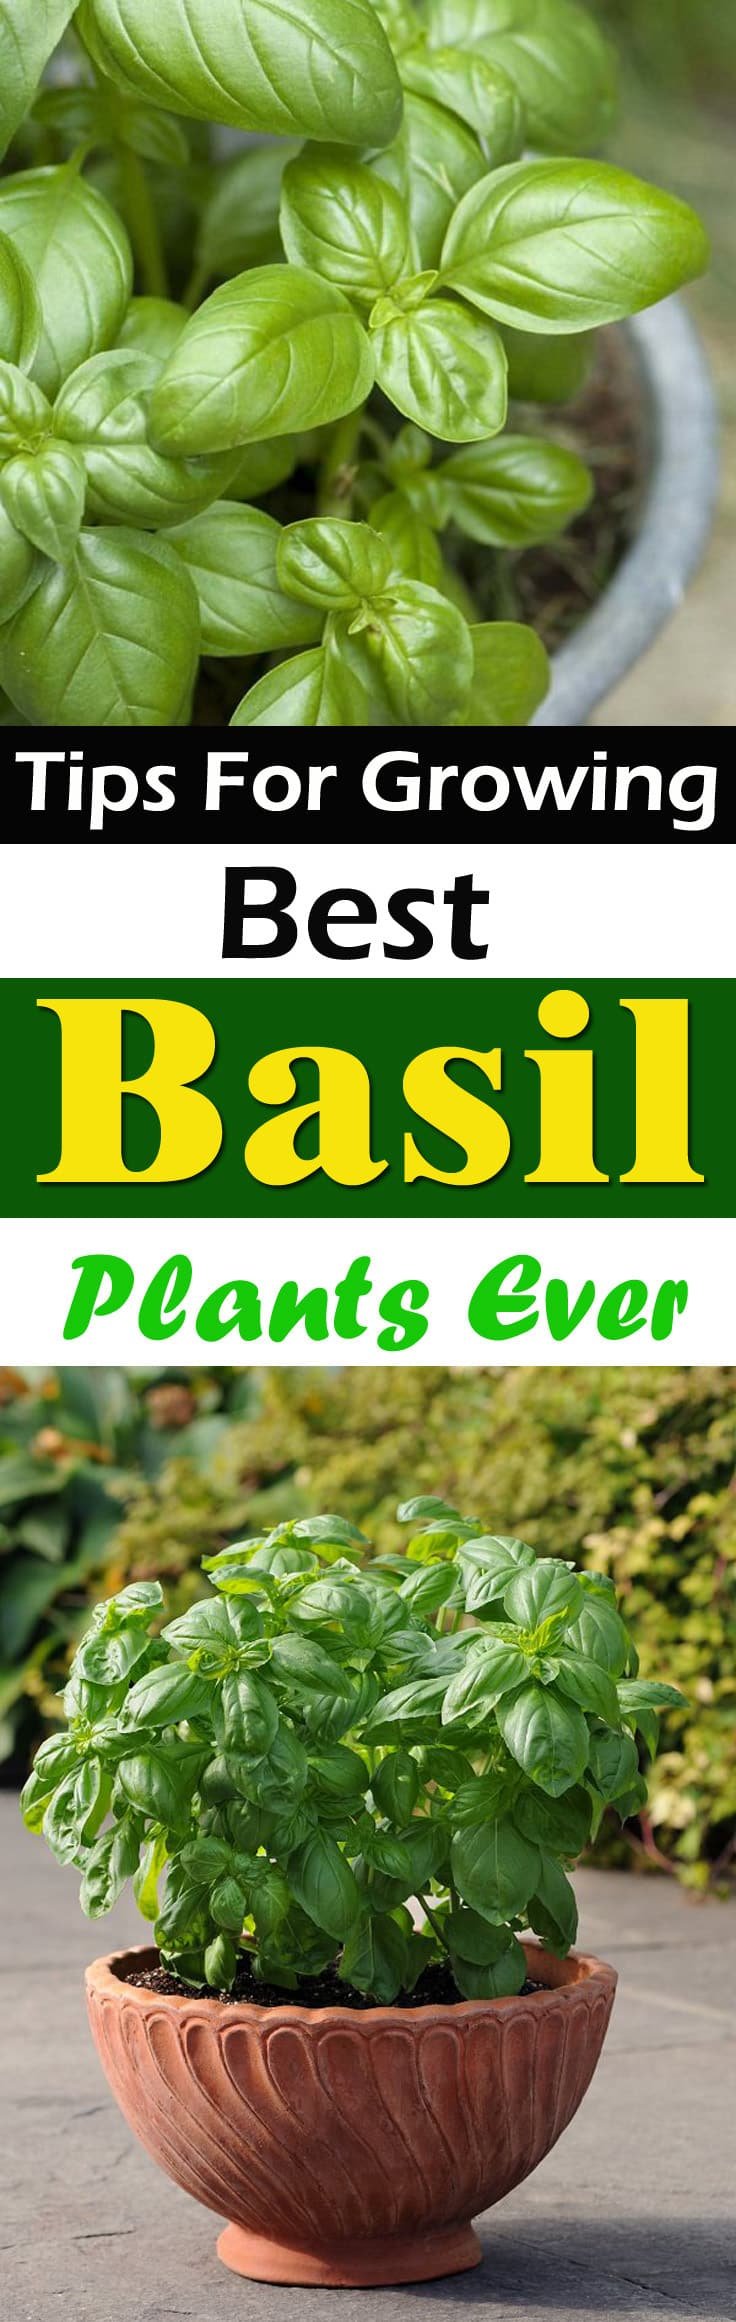 Take a look at these 9 Essential Basil Growing Tips to have a lush and productive basil plant in your herb garden!